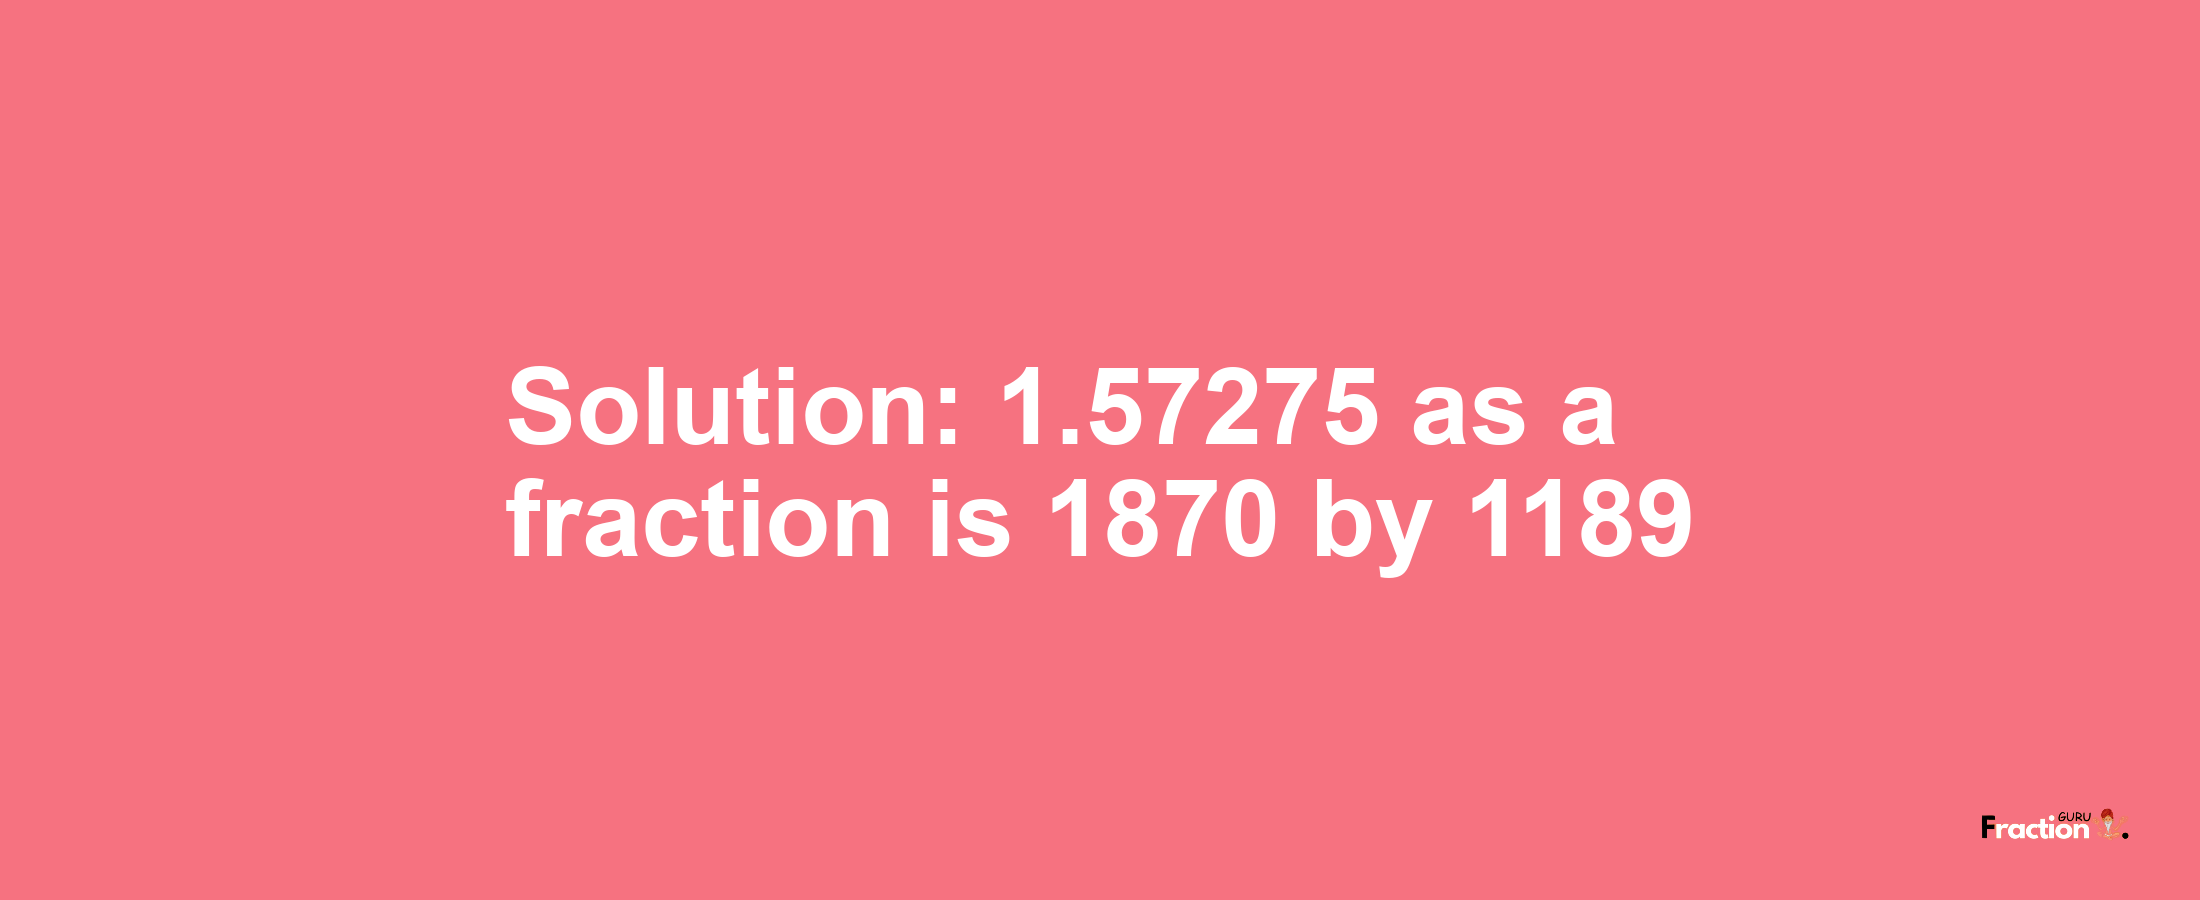 Solution:1.57275 as a fraction is 1870/1189